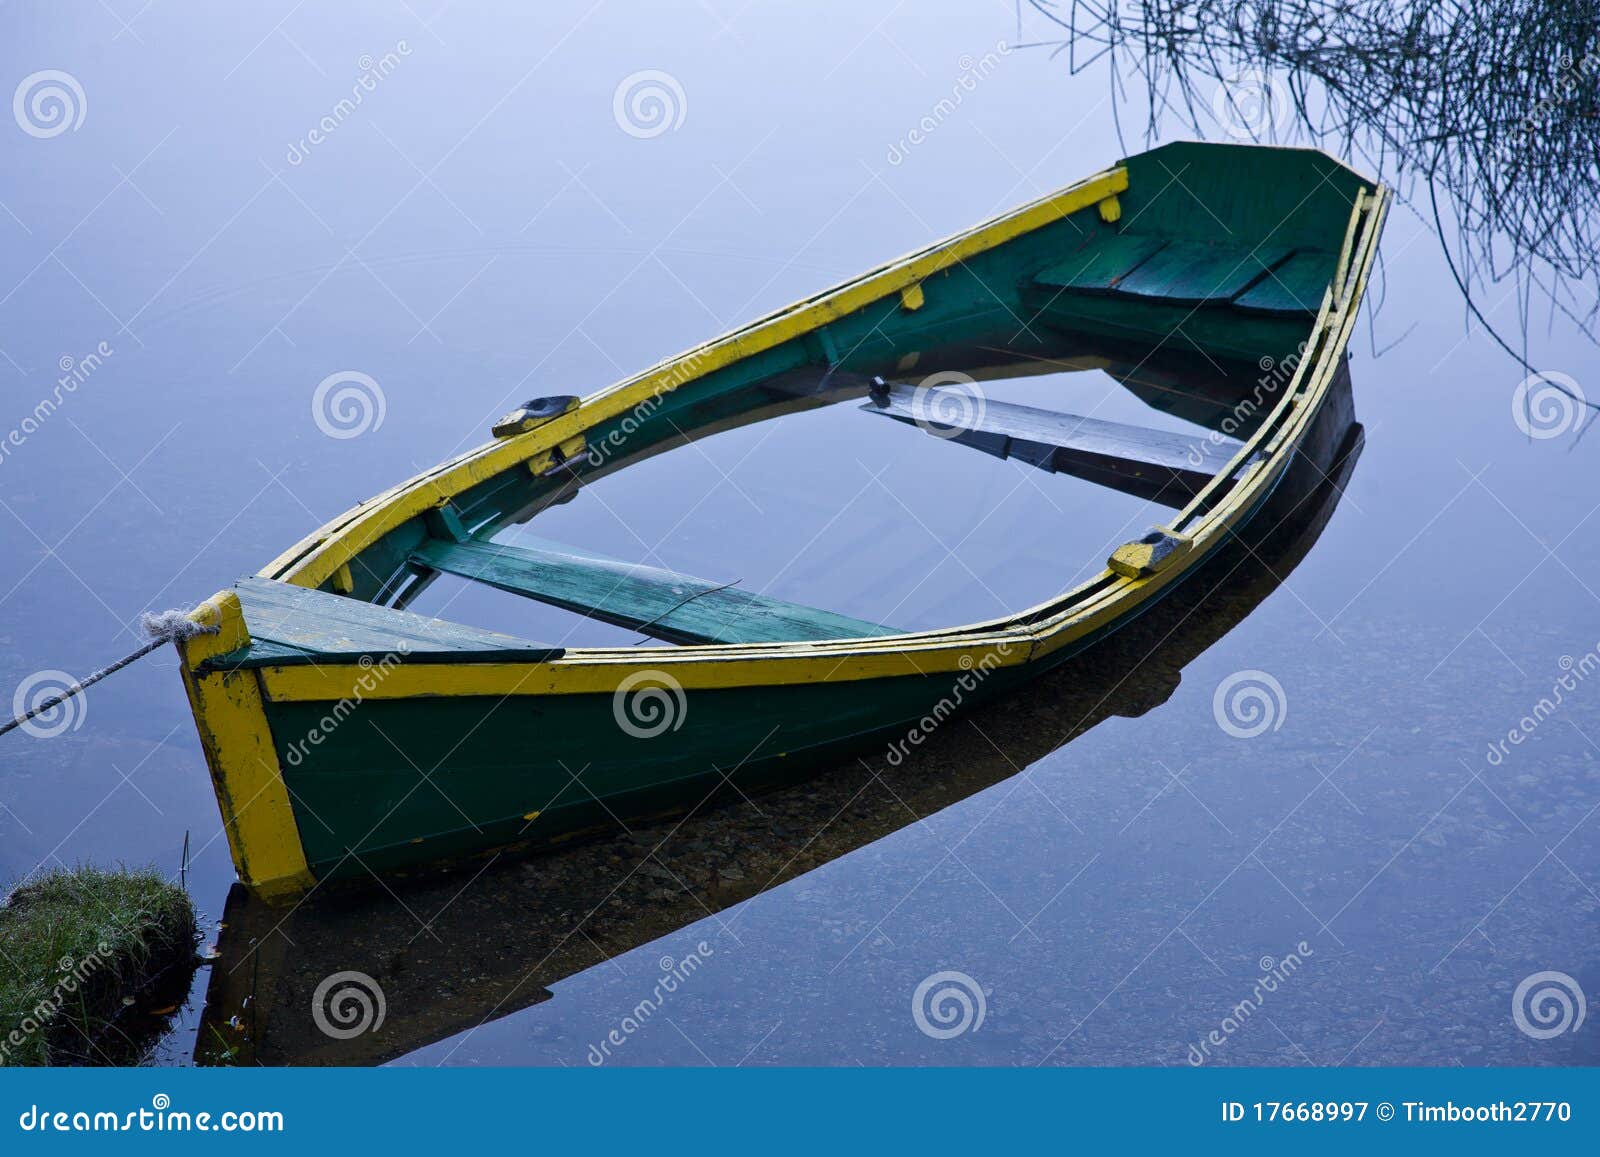 Sunken Row Boat Royalty Free Stock Photography - Image: 17668997